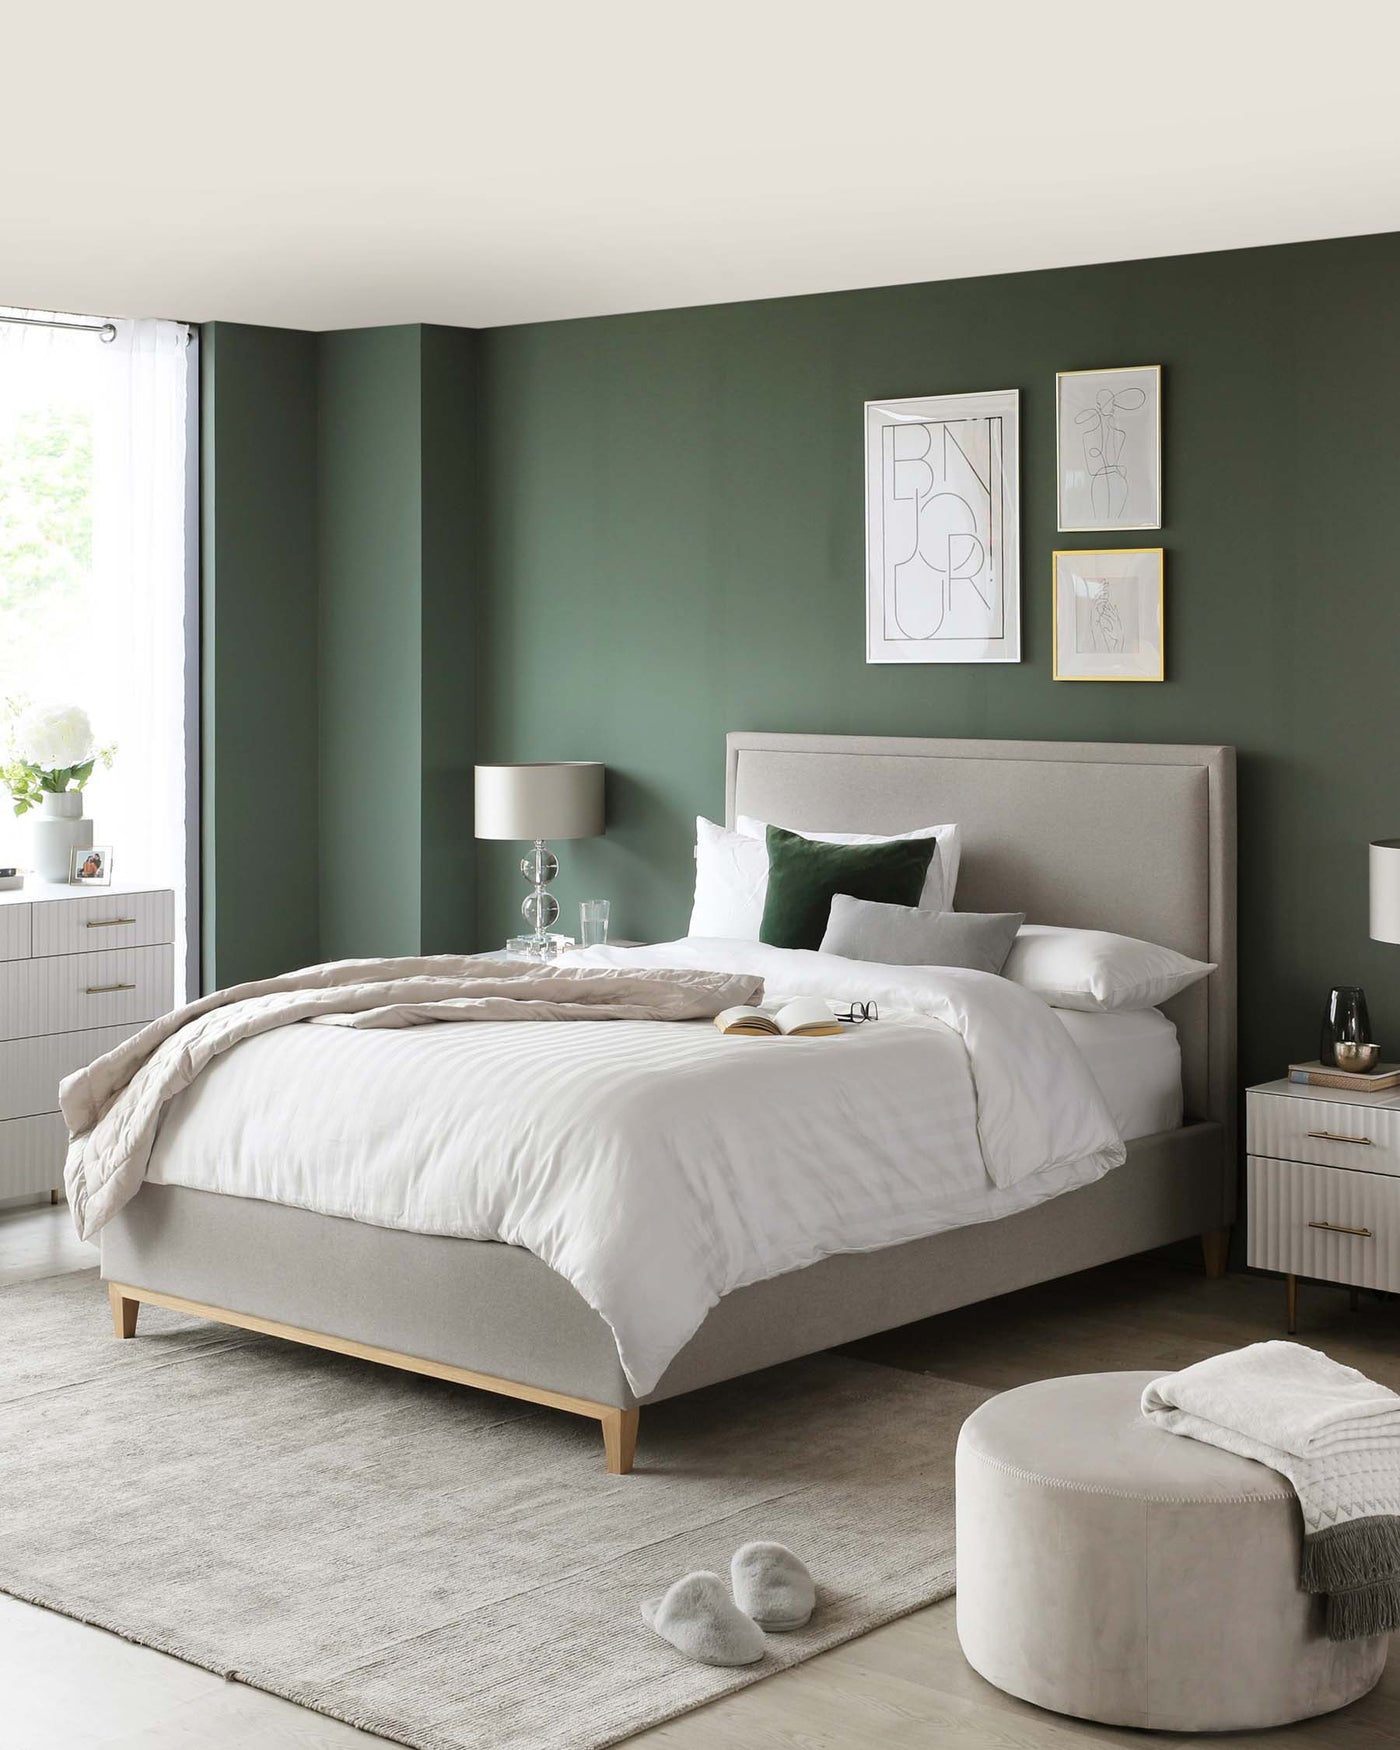 Modern bedroom with a king-sized bed upholstered in a light grey fabric featuring a simple headboard, complemented by matching light grey nightstands with white drawers, accented by sleek metal pulls. A small, round, light grey ottoman is positioned at the foot of the bed on top of a large area rug that adds a layer of texture to the room.